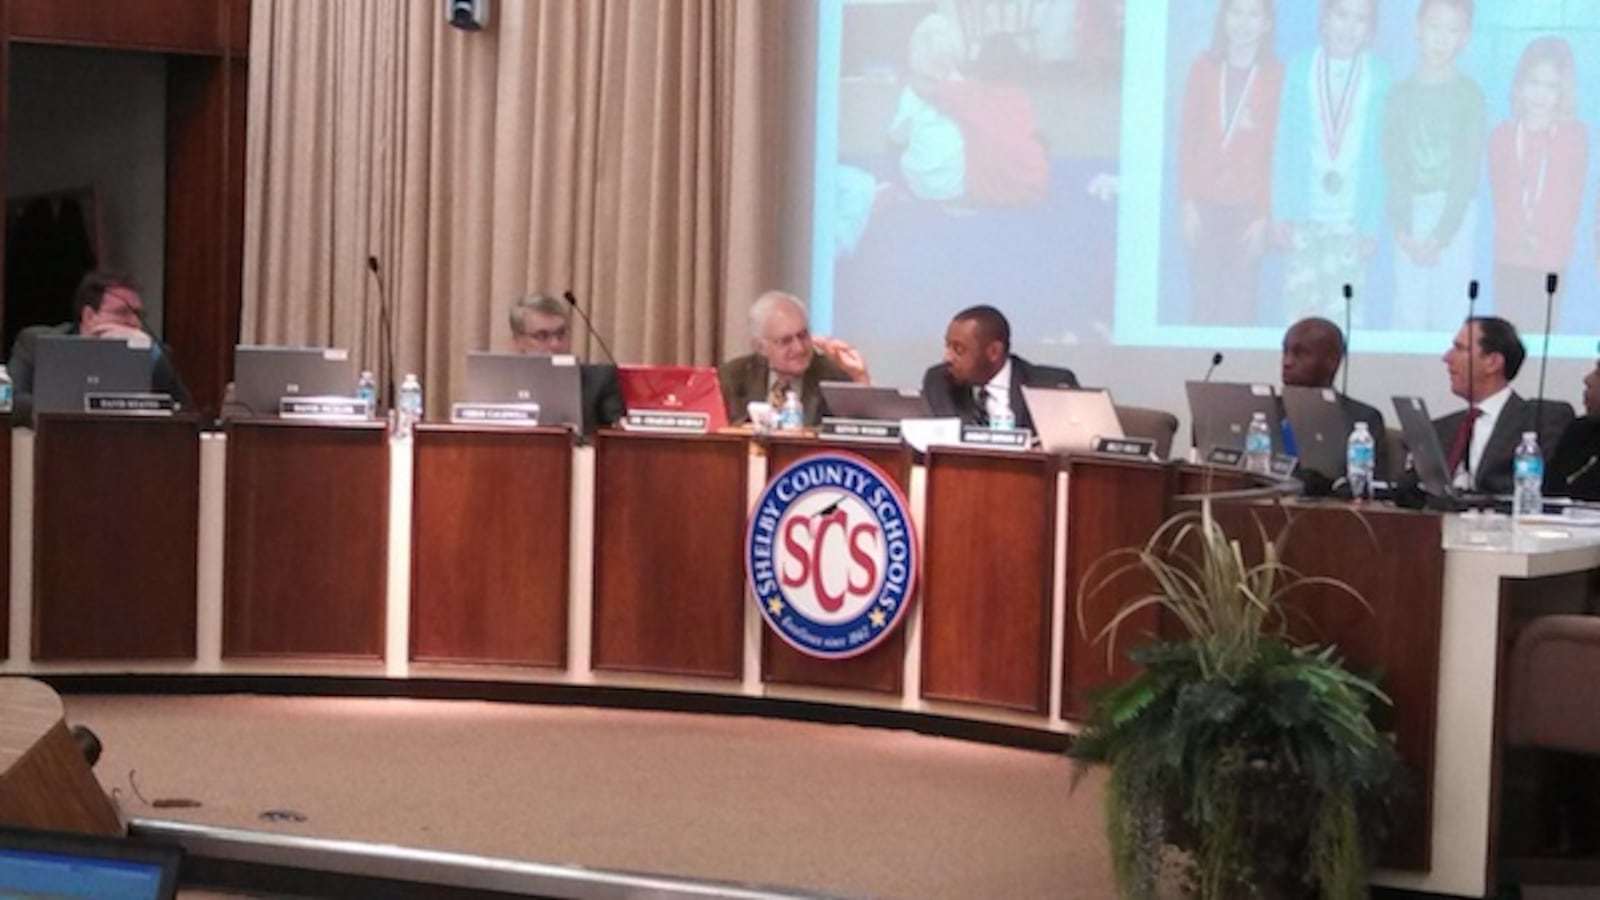 Shelby County School Board meets for January business meeting.